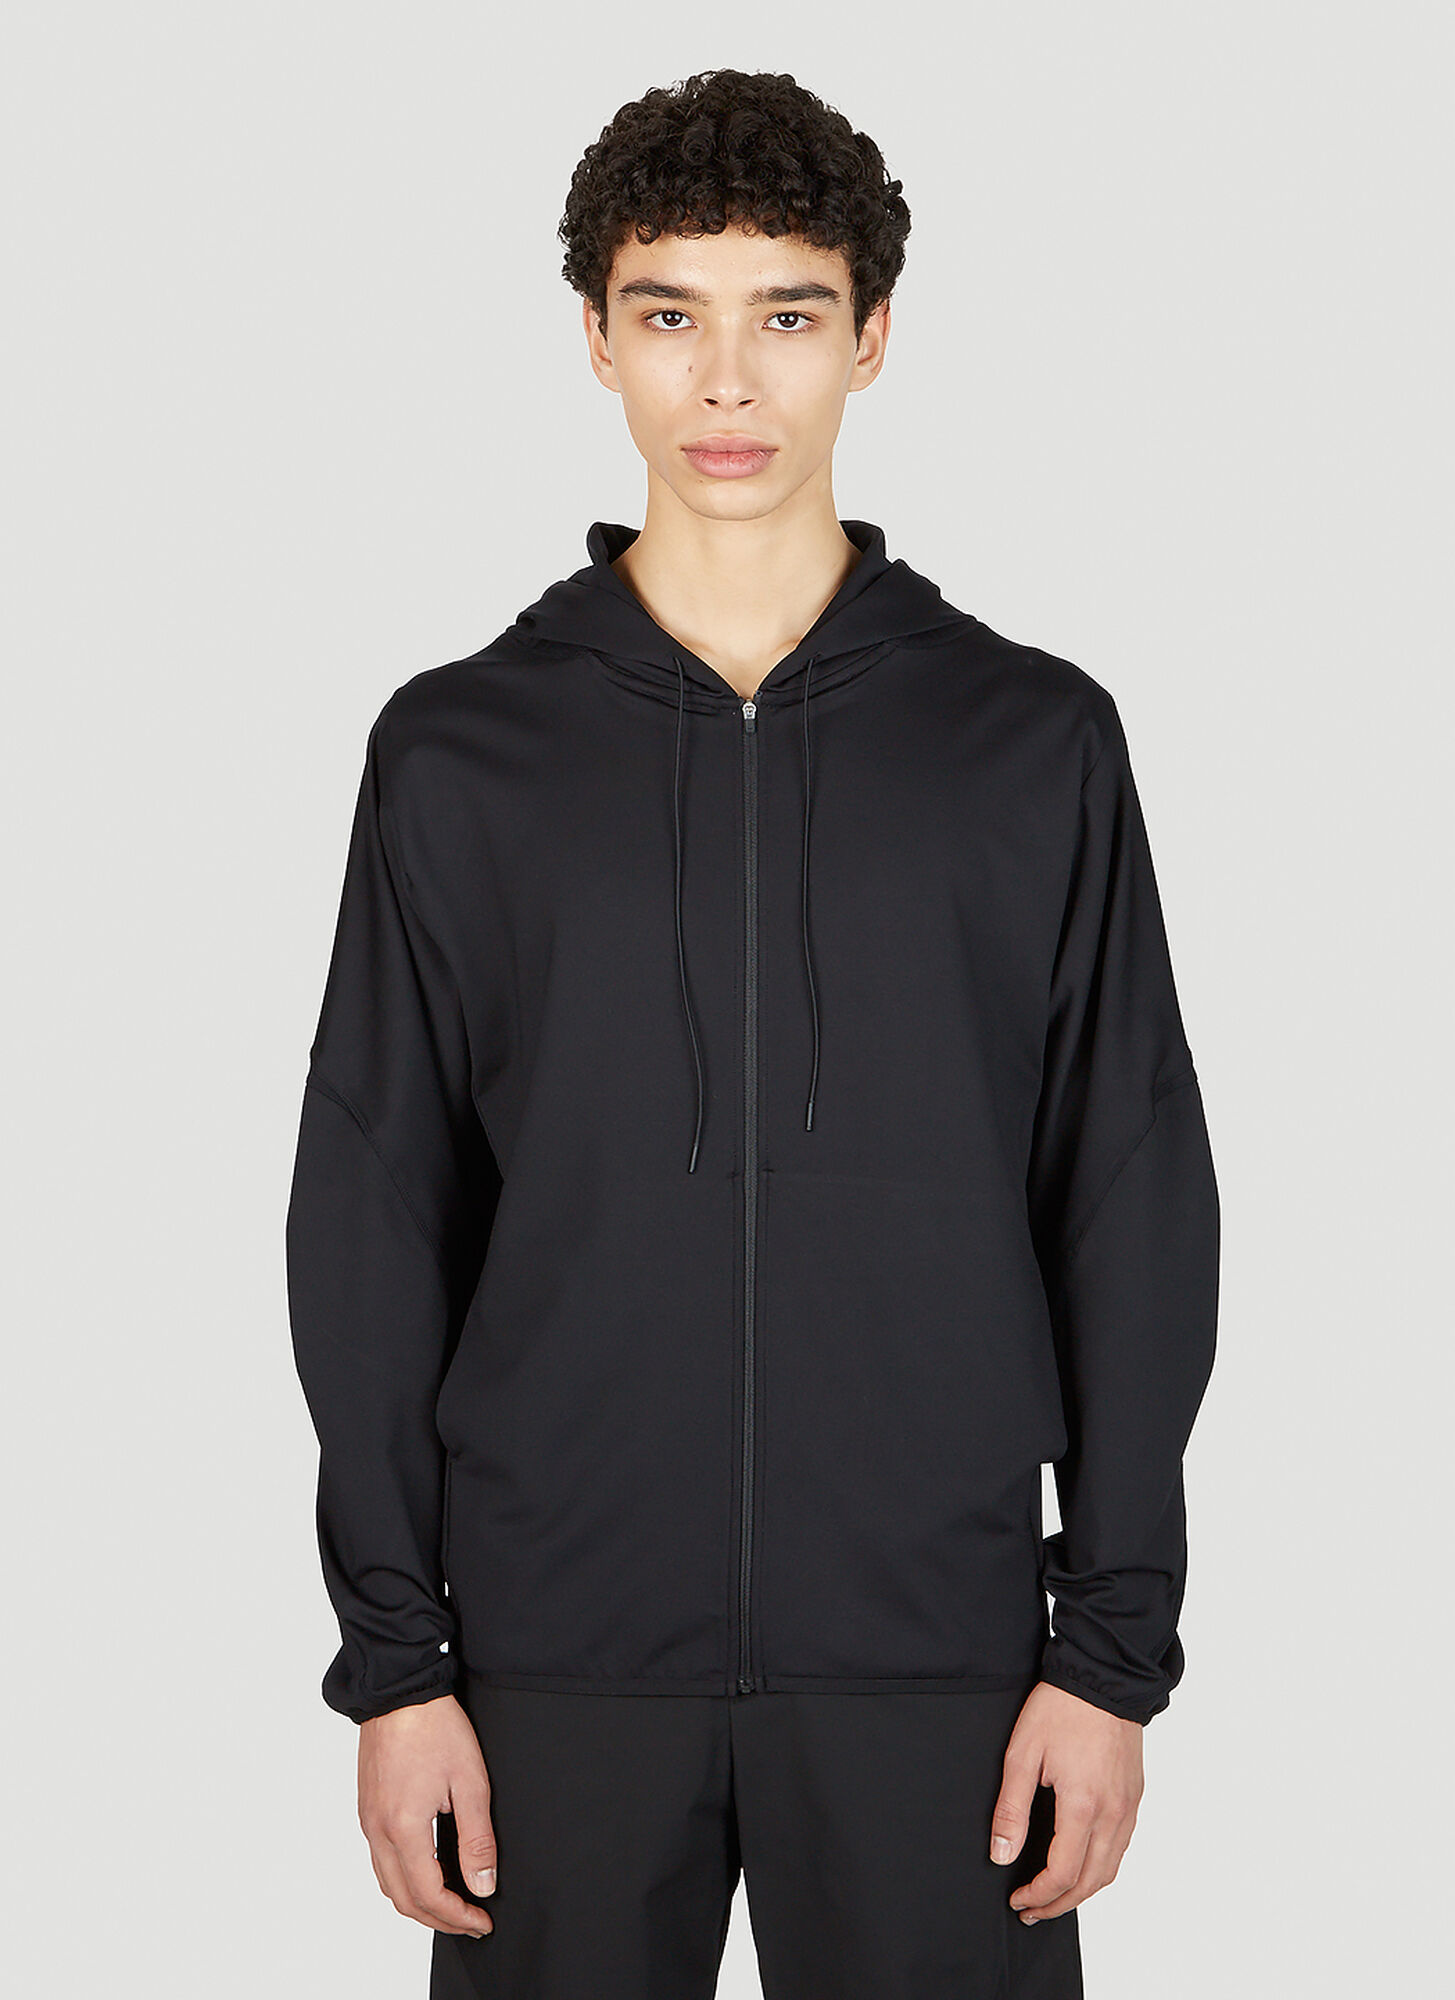 Post Archive Faction (paf) 5.0 Right Hooded Sweatshirt In Black